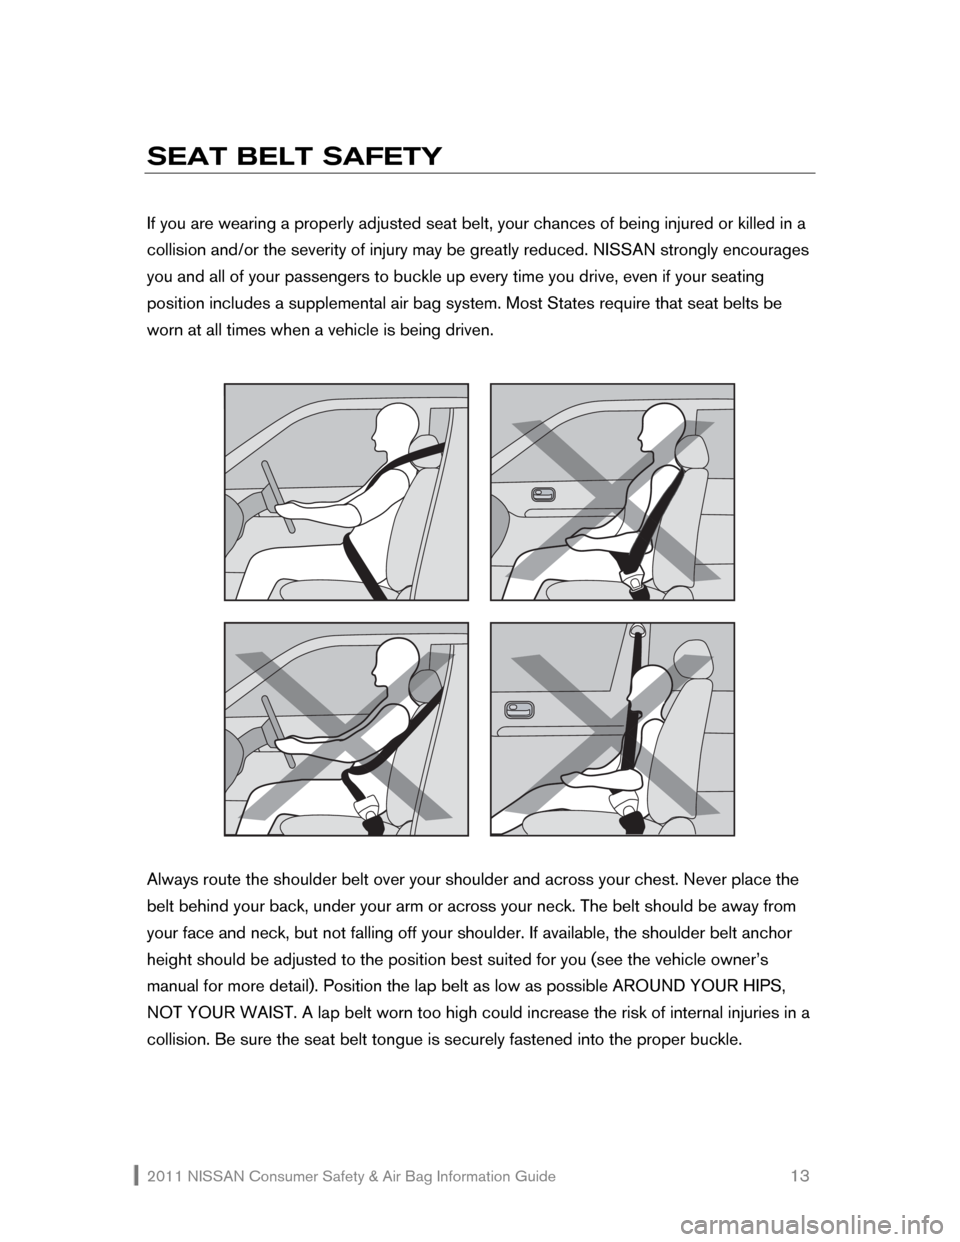 NISSAN ROGUE 2011 1.G Consumer Safety Air Bag Information Guide 2011 NISSAN Consumer Safety & Air Bag Information Guide                                                       13 
SEAT BELT SAFETY 
 
If you are wearing a properly adjusted seat belt, your chances of 